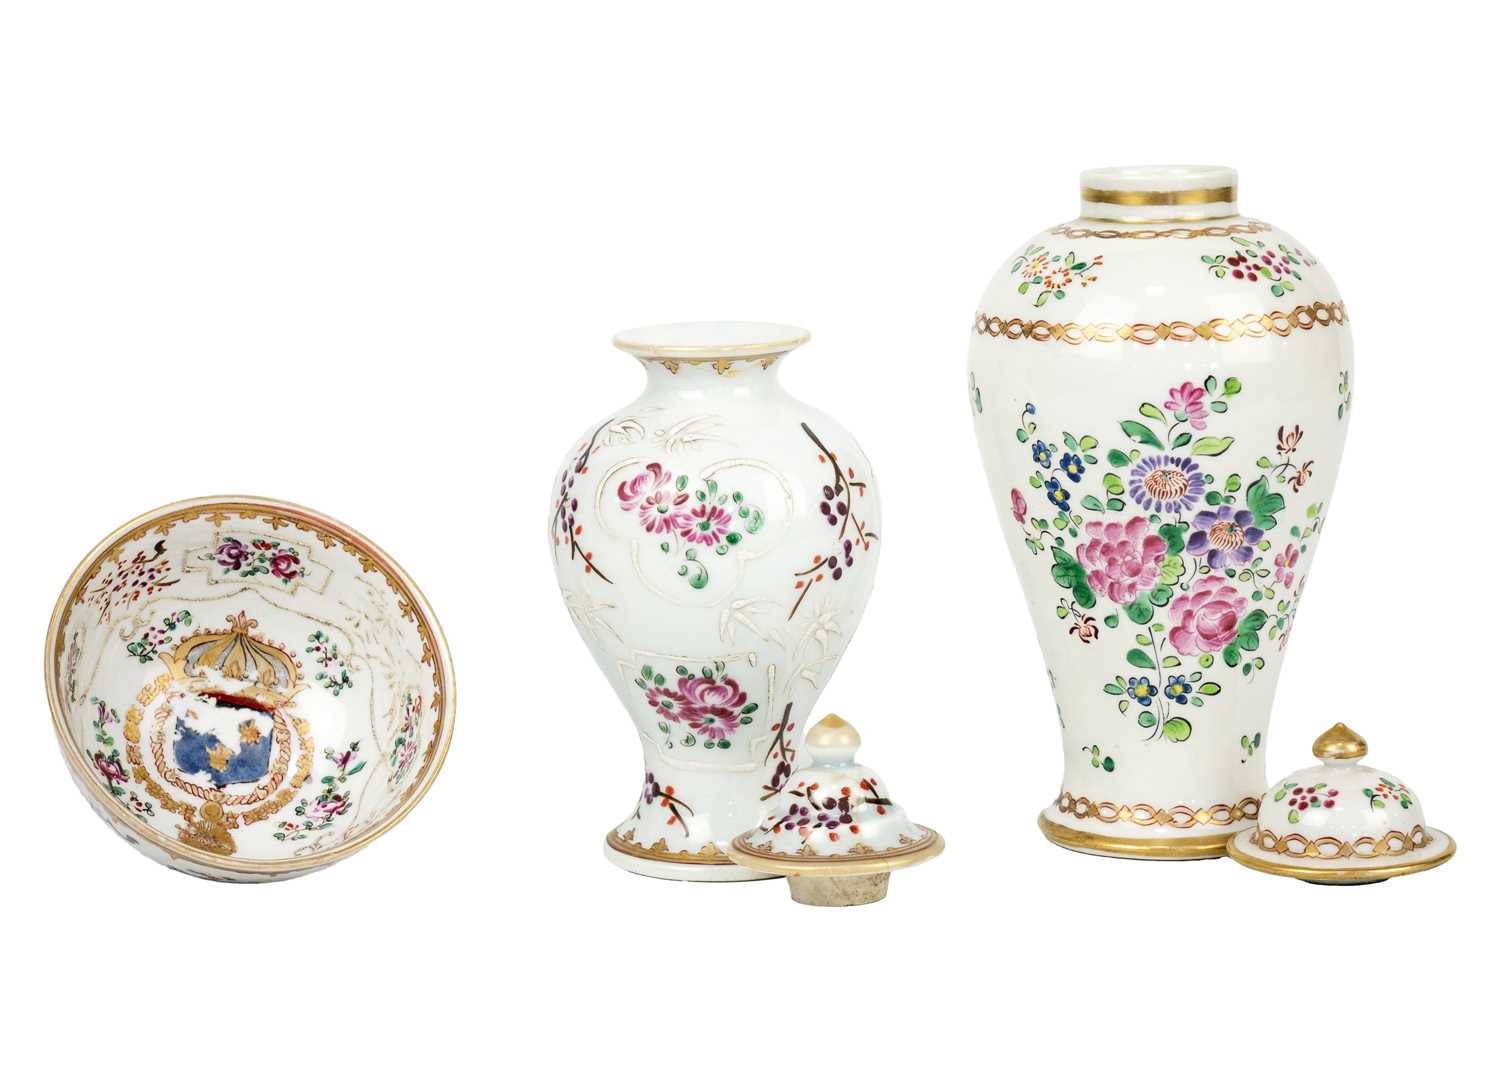 Two Samson porcelain famille rose vases, in Chinese export style, circa 1900. - Image 3 of 6